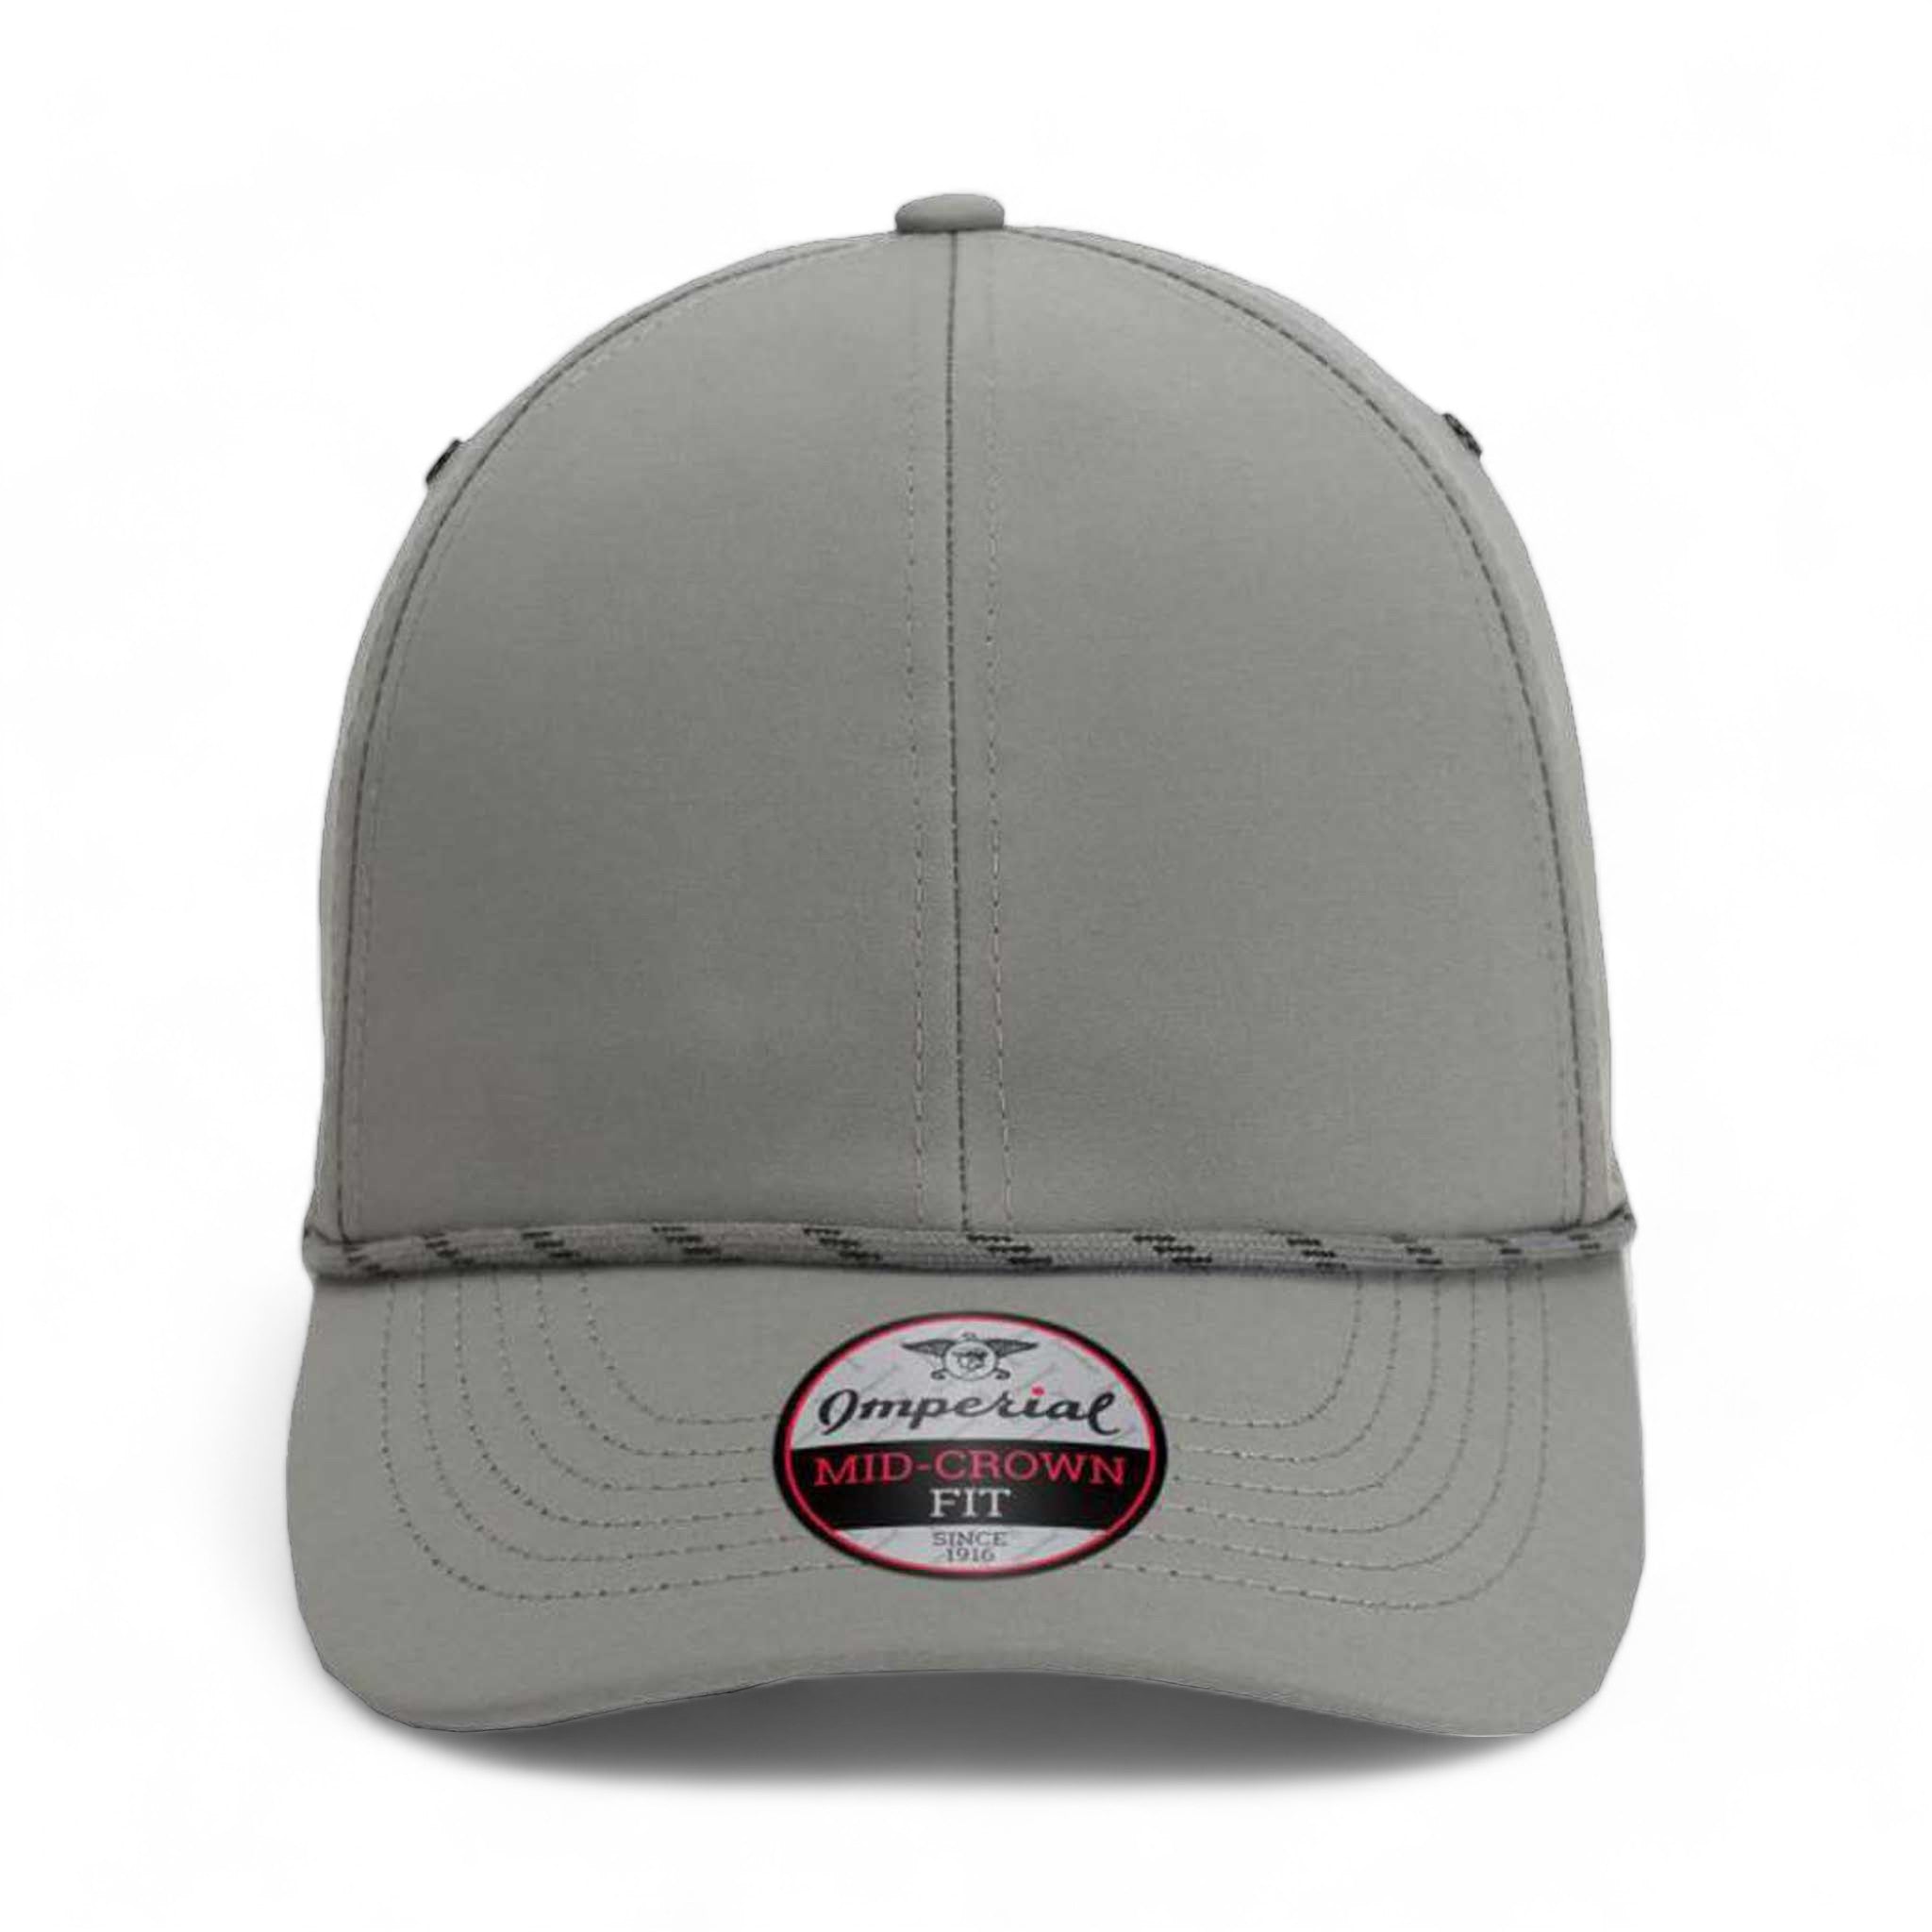 Front view of Imperial 6054 custom hat in grey